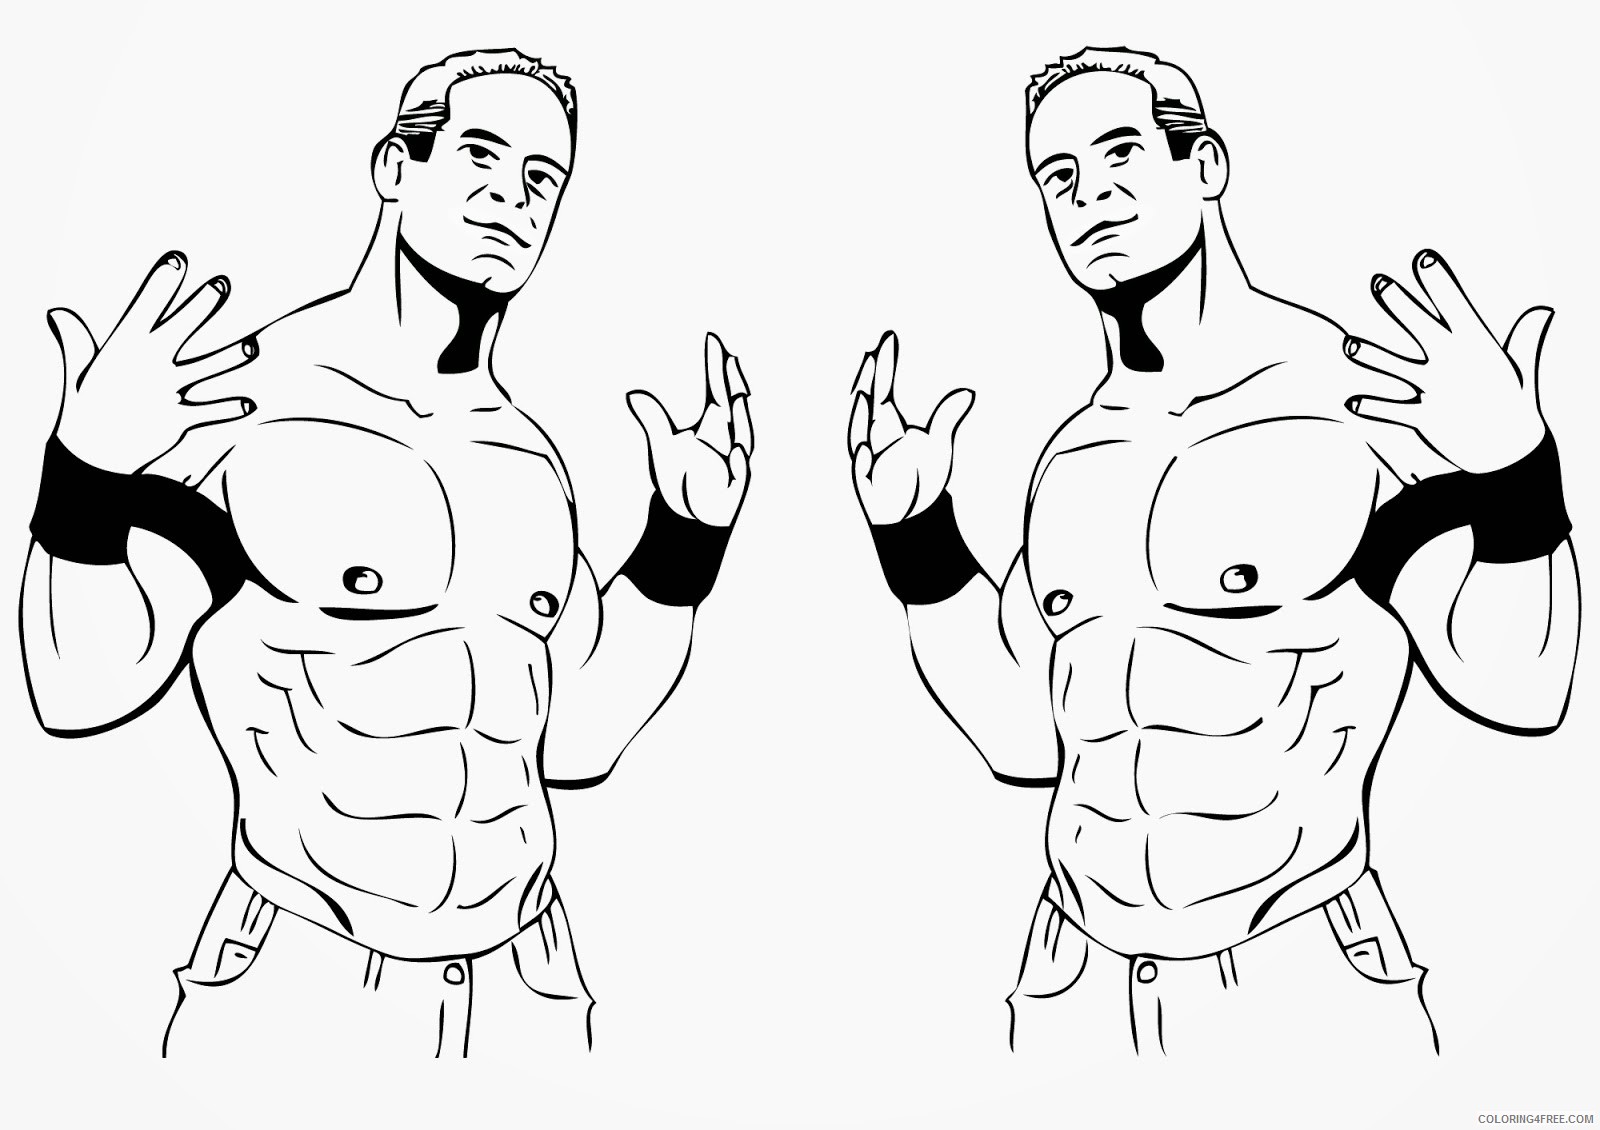 wwe coloring pages john cenas style Coloring4free